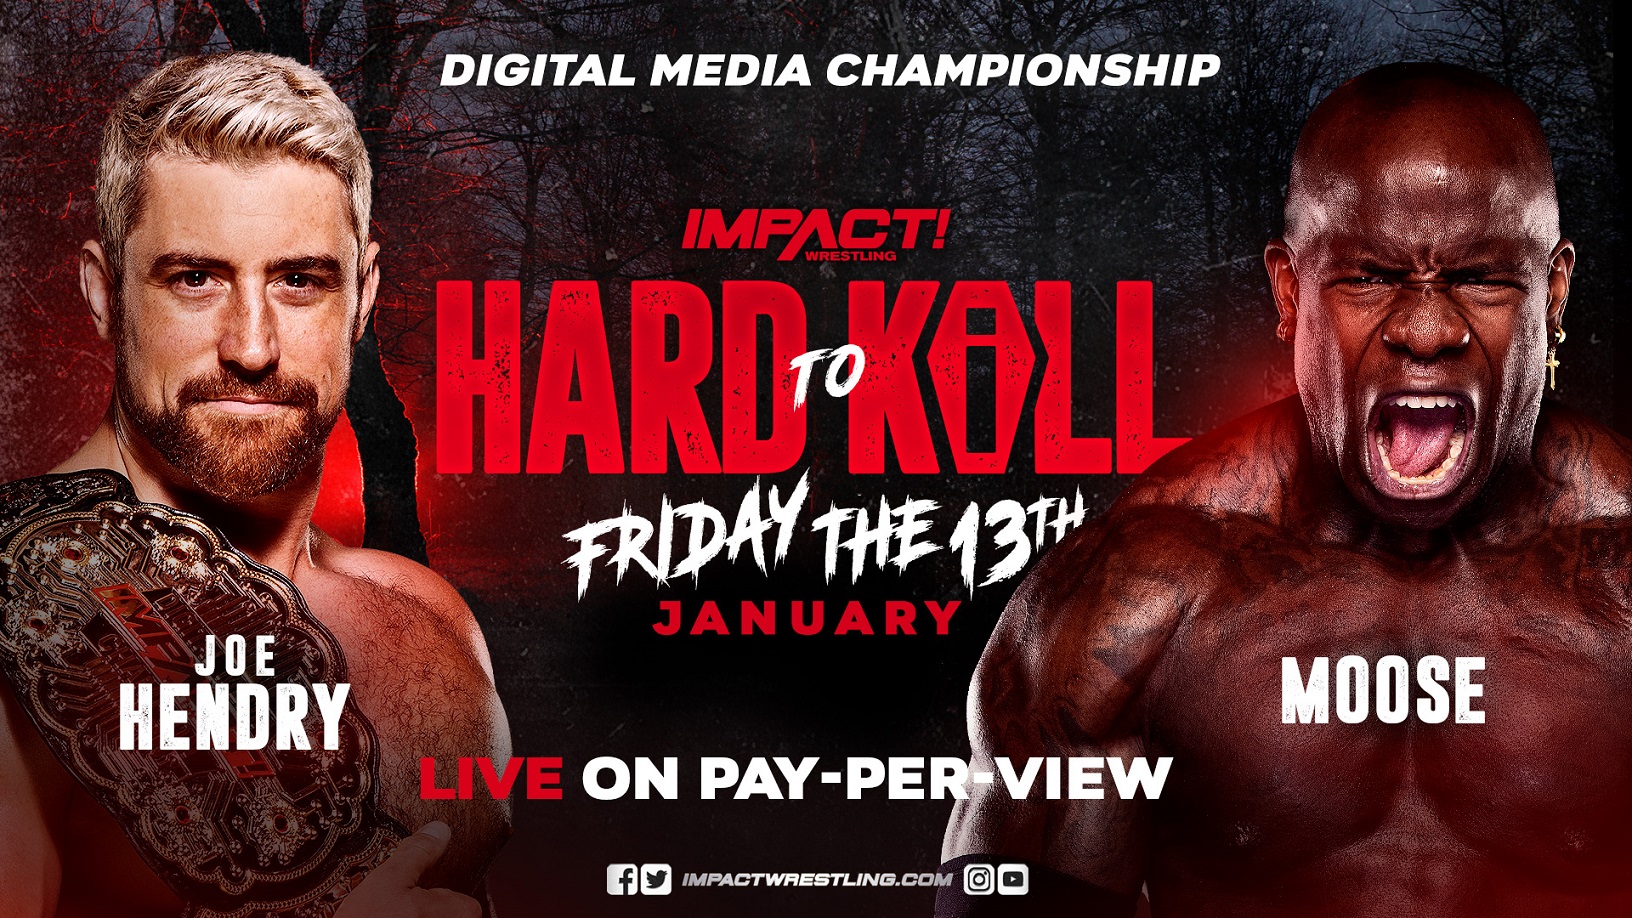 Moose Accepts Joe Hendry’s Challenge for a Digital Media Title Clash at Hard To Kill